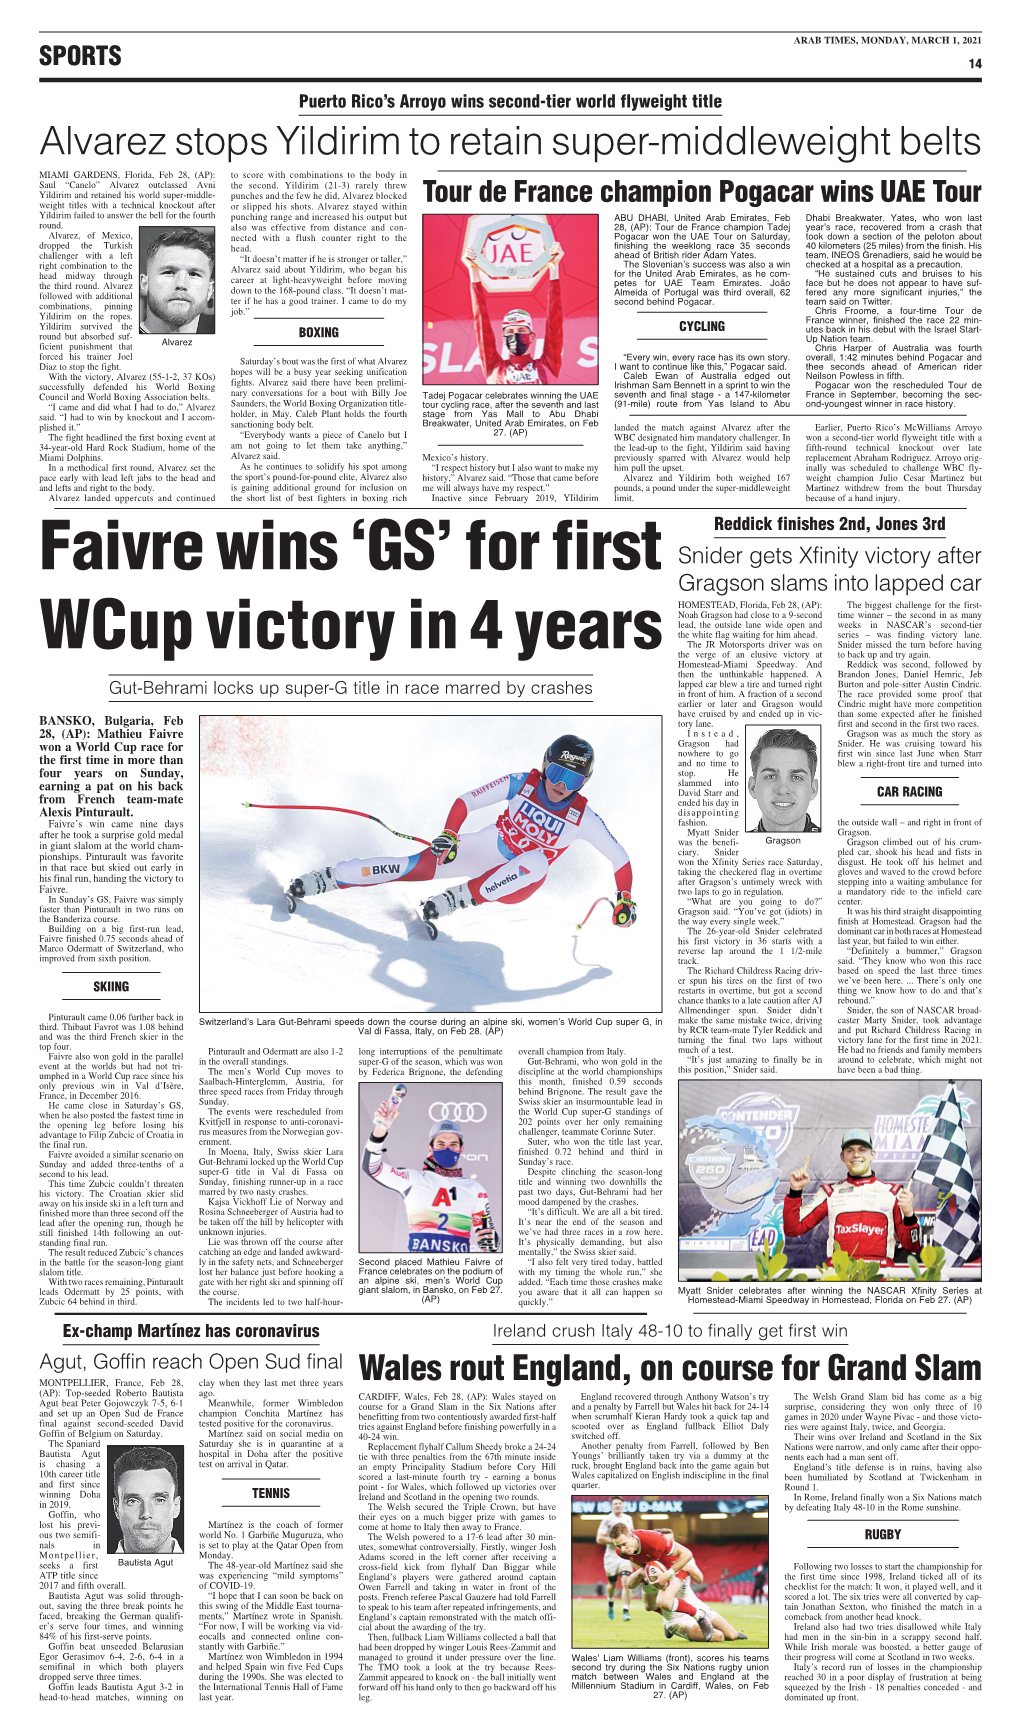 Faivre Wins 'GS' for First Wcup Victory in 4 Years